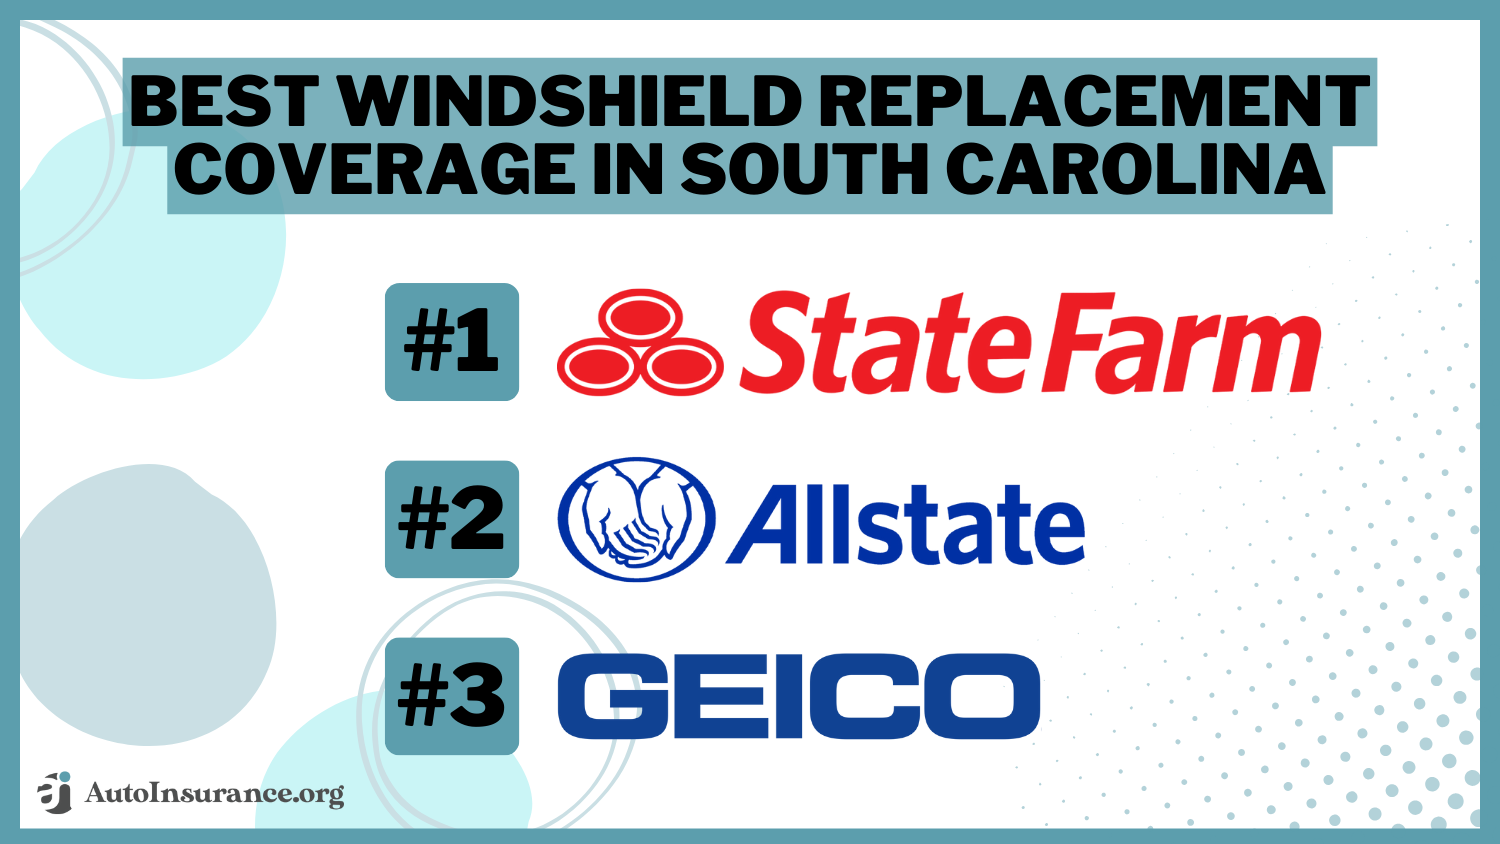 Best Windshield Replacement Coverage in South Carolina: State Farm, Allstate, and Geico